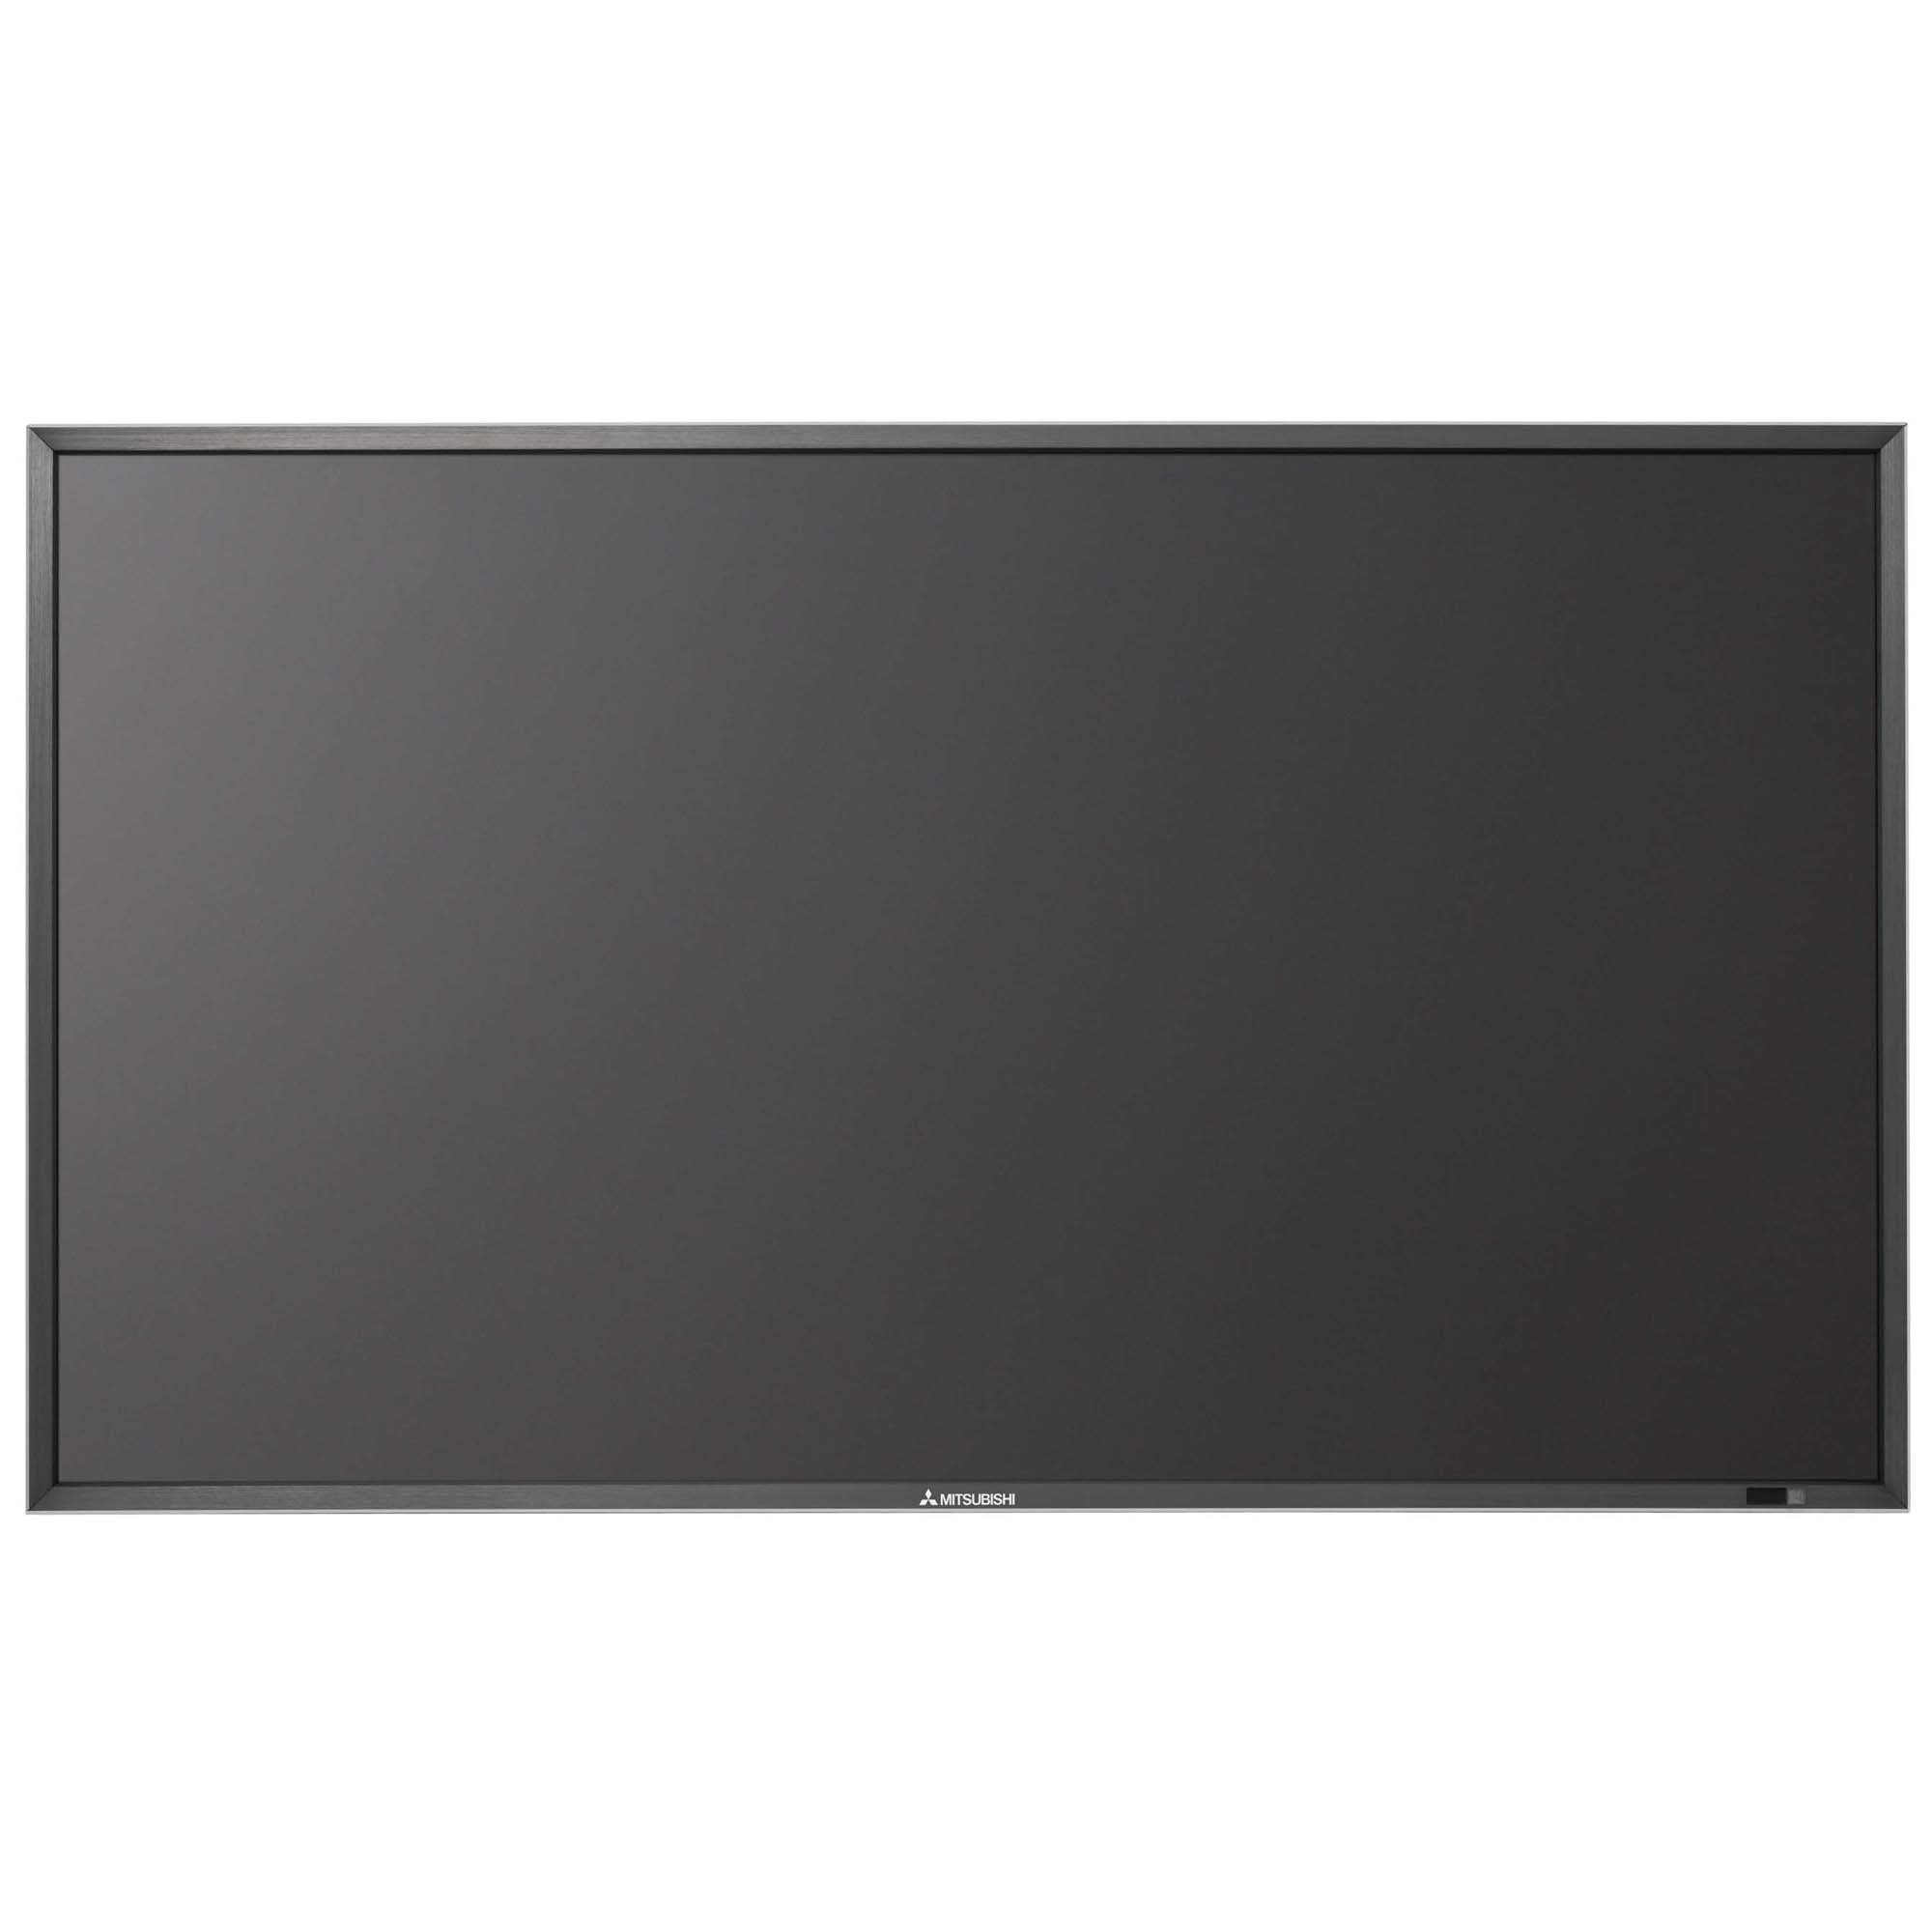 42-INCH COMMERCIAL 1080P DIGITAL SIGNAGE